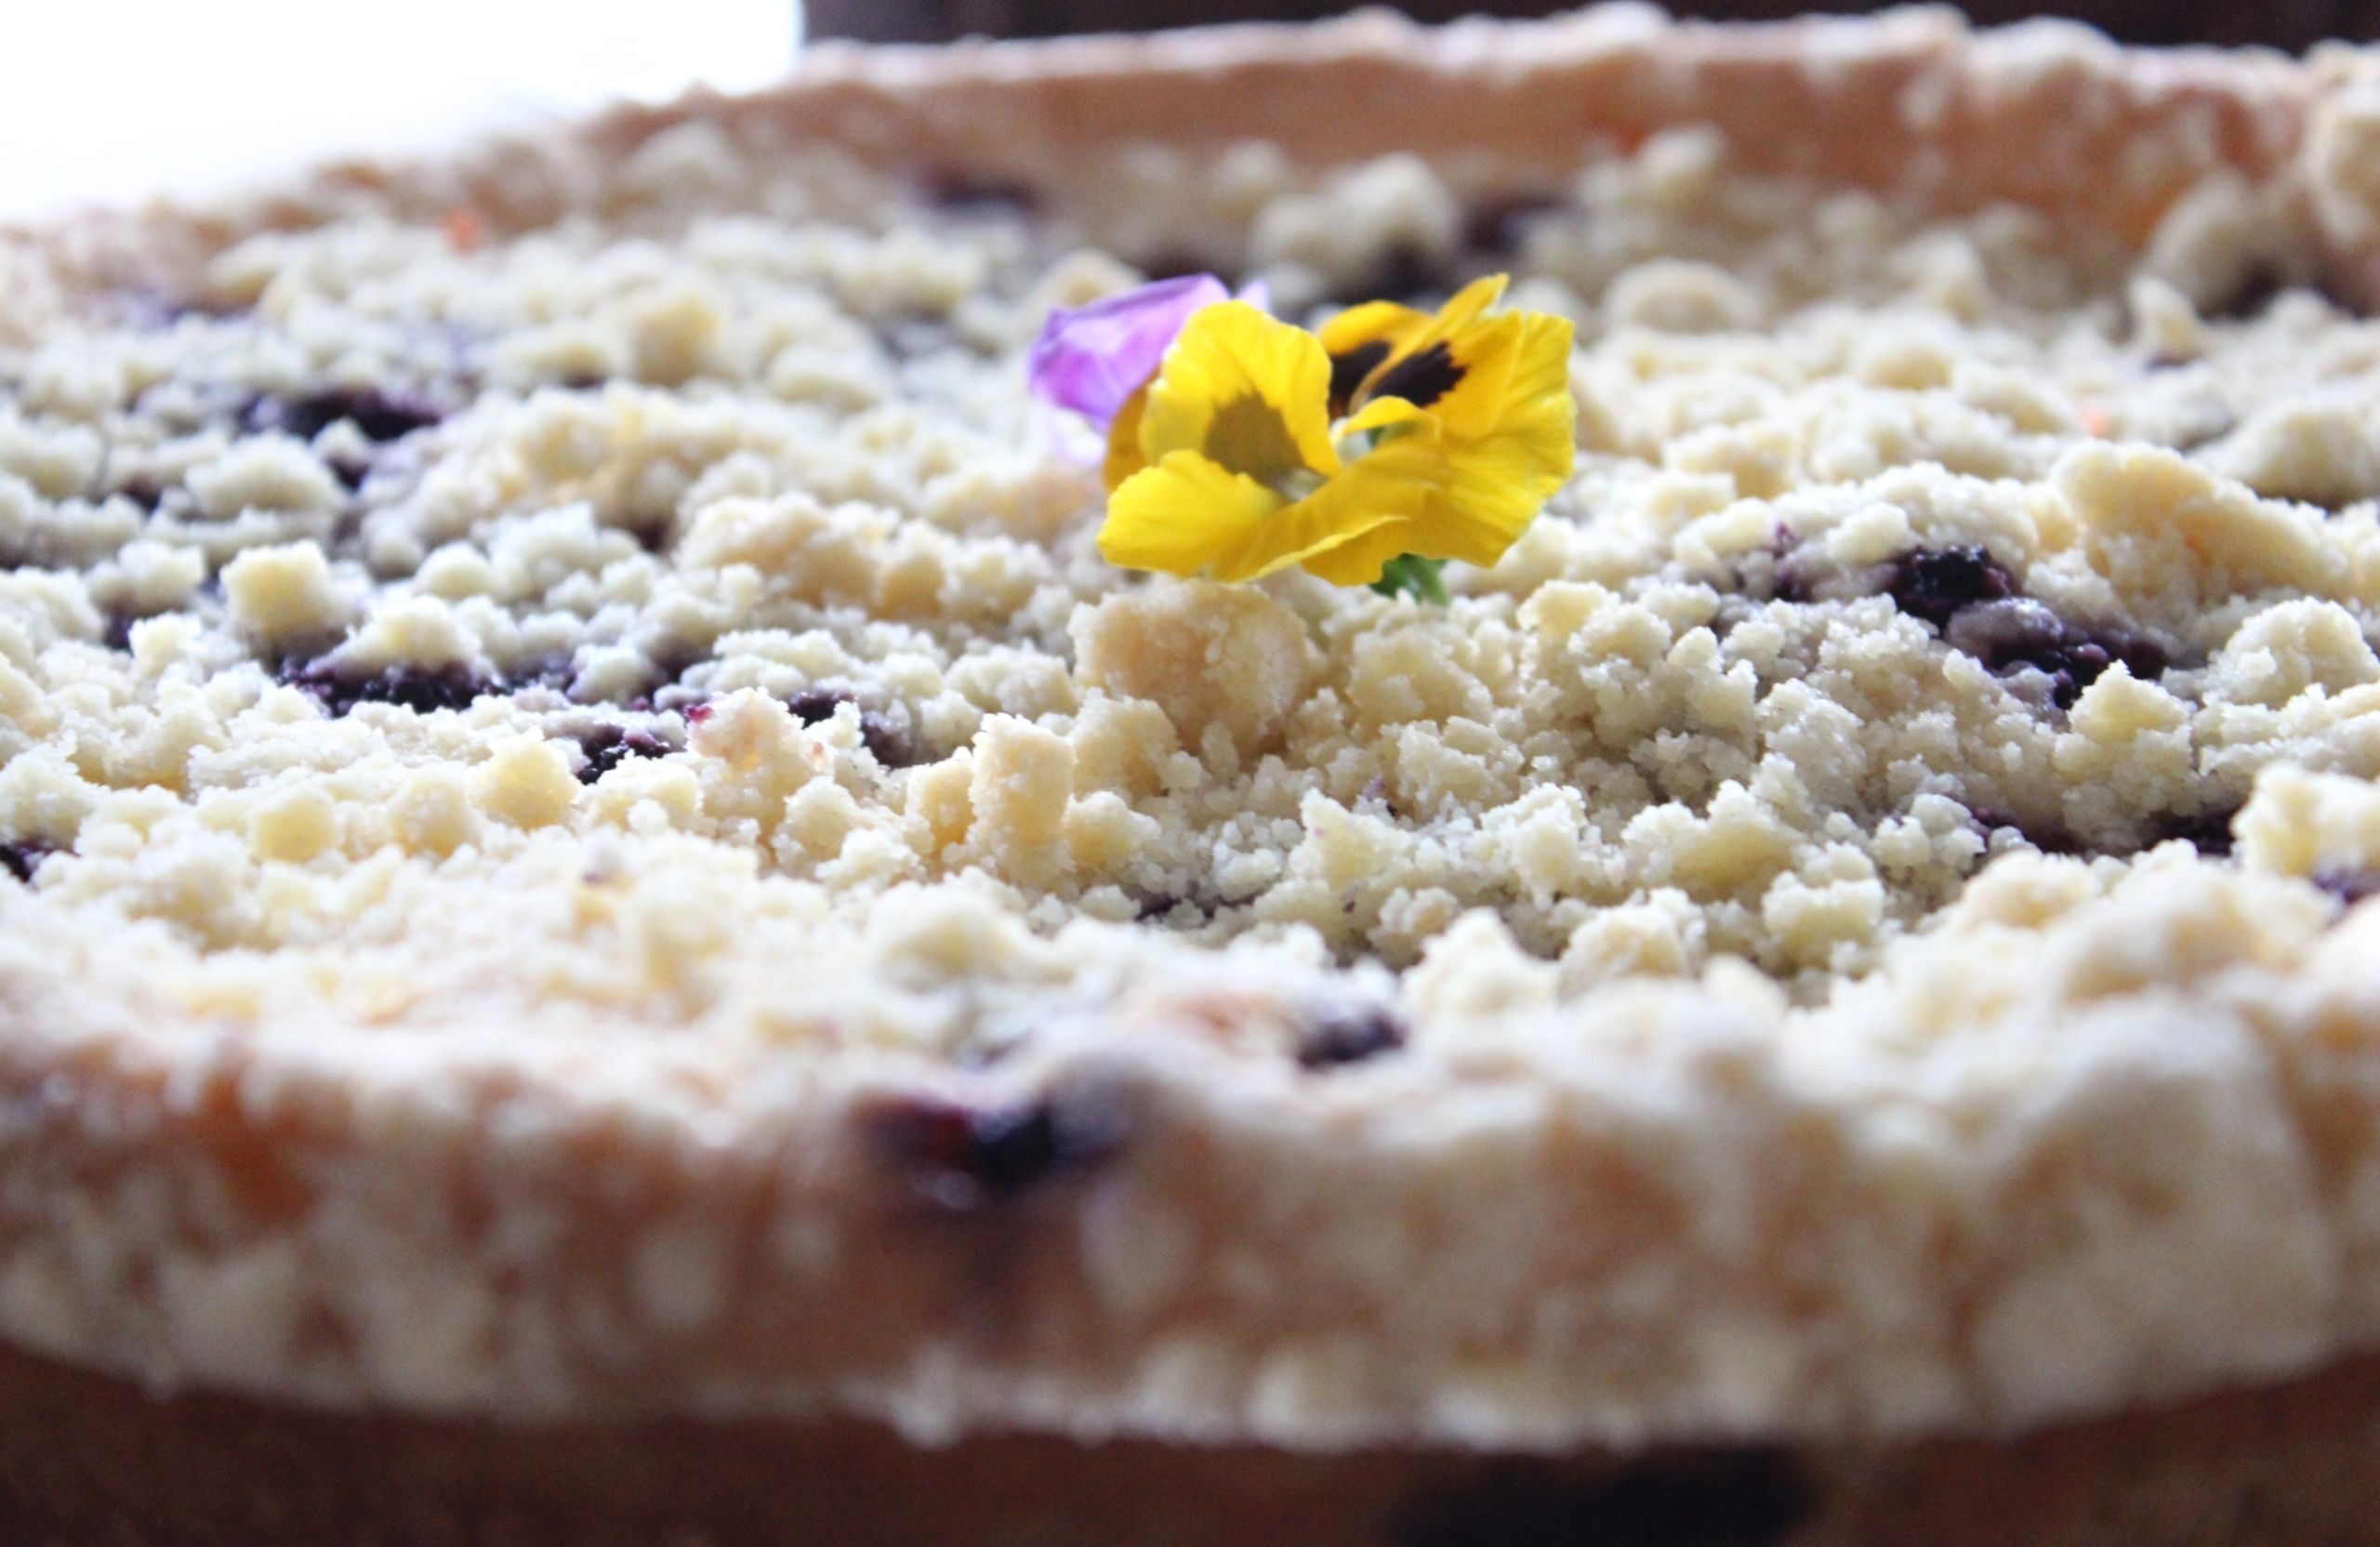 edible pansy flower on a crumbly pastry